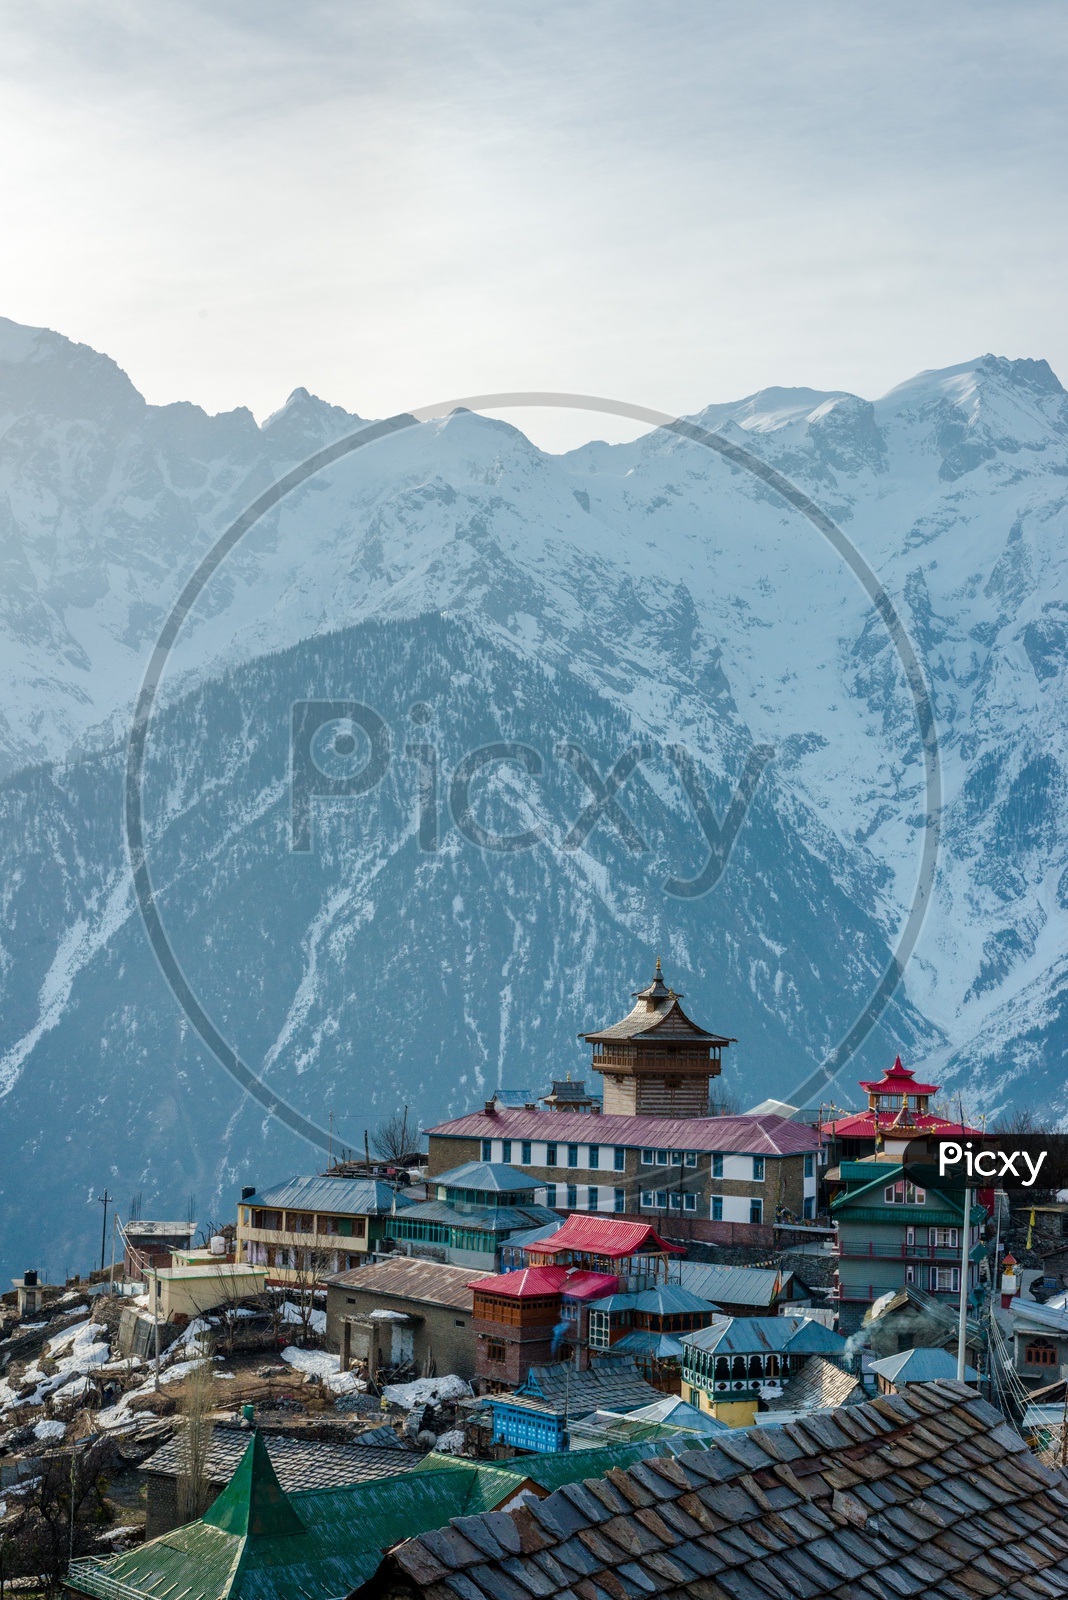 Buddhist Shrines on the top of Himalayas